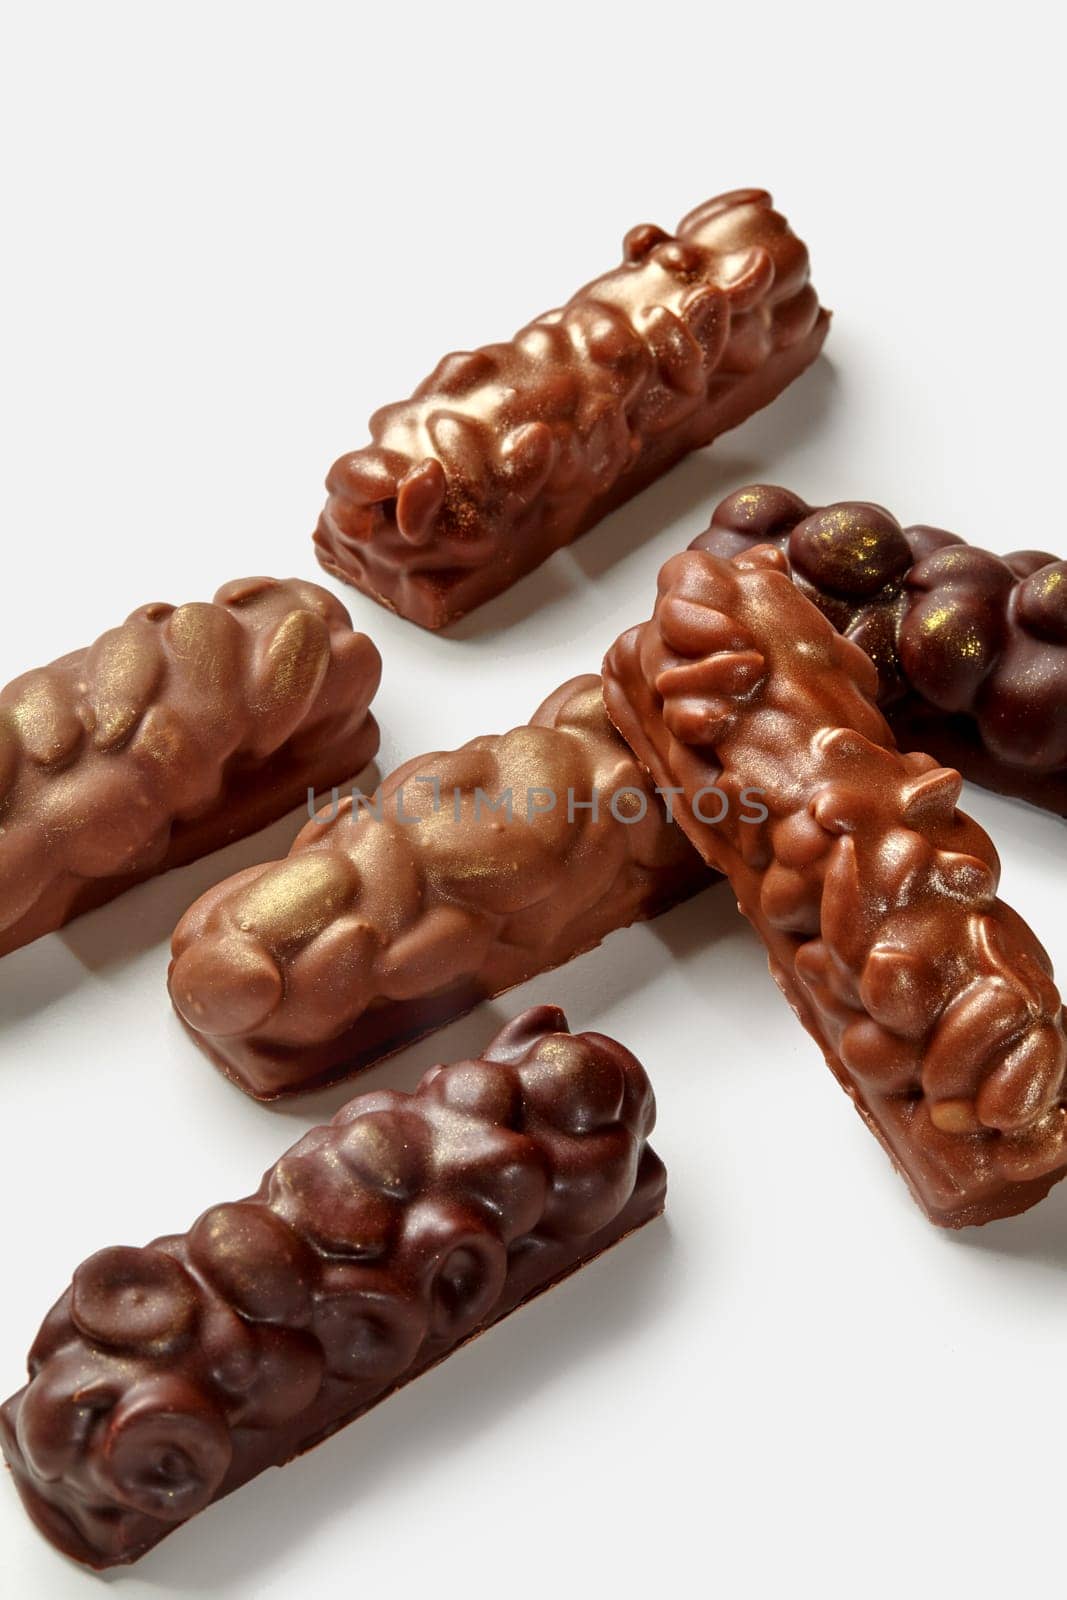 Variety of milk and dark chocolate bars with almonds, peanuts and hazelnuts, displayed against white background. Popular sweet snack concept